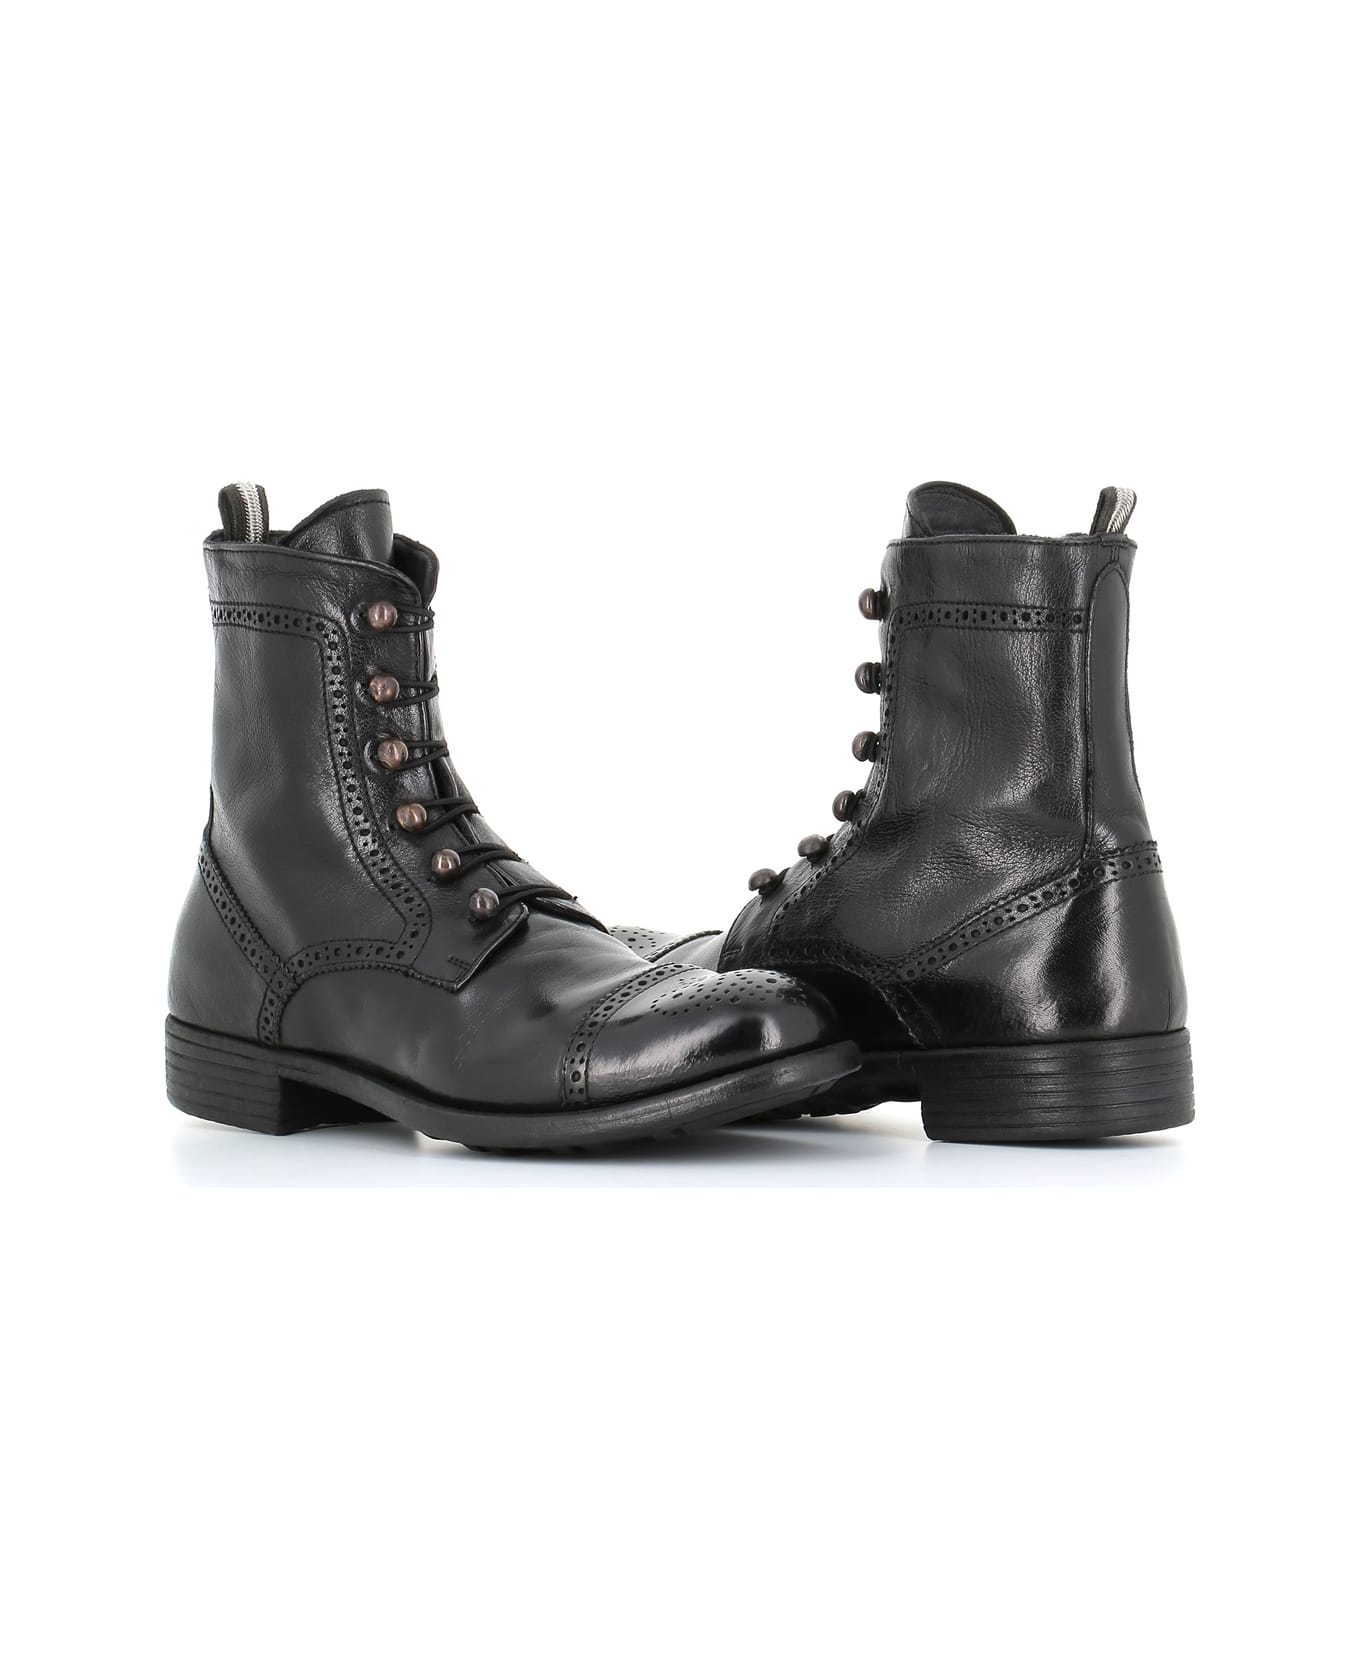 Officine Creative Lace-up Boot Calixte/023 - Black ブーツ